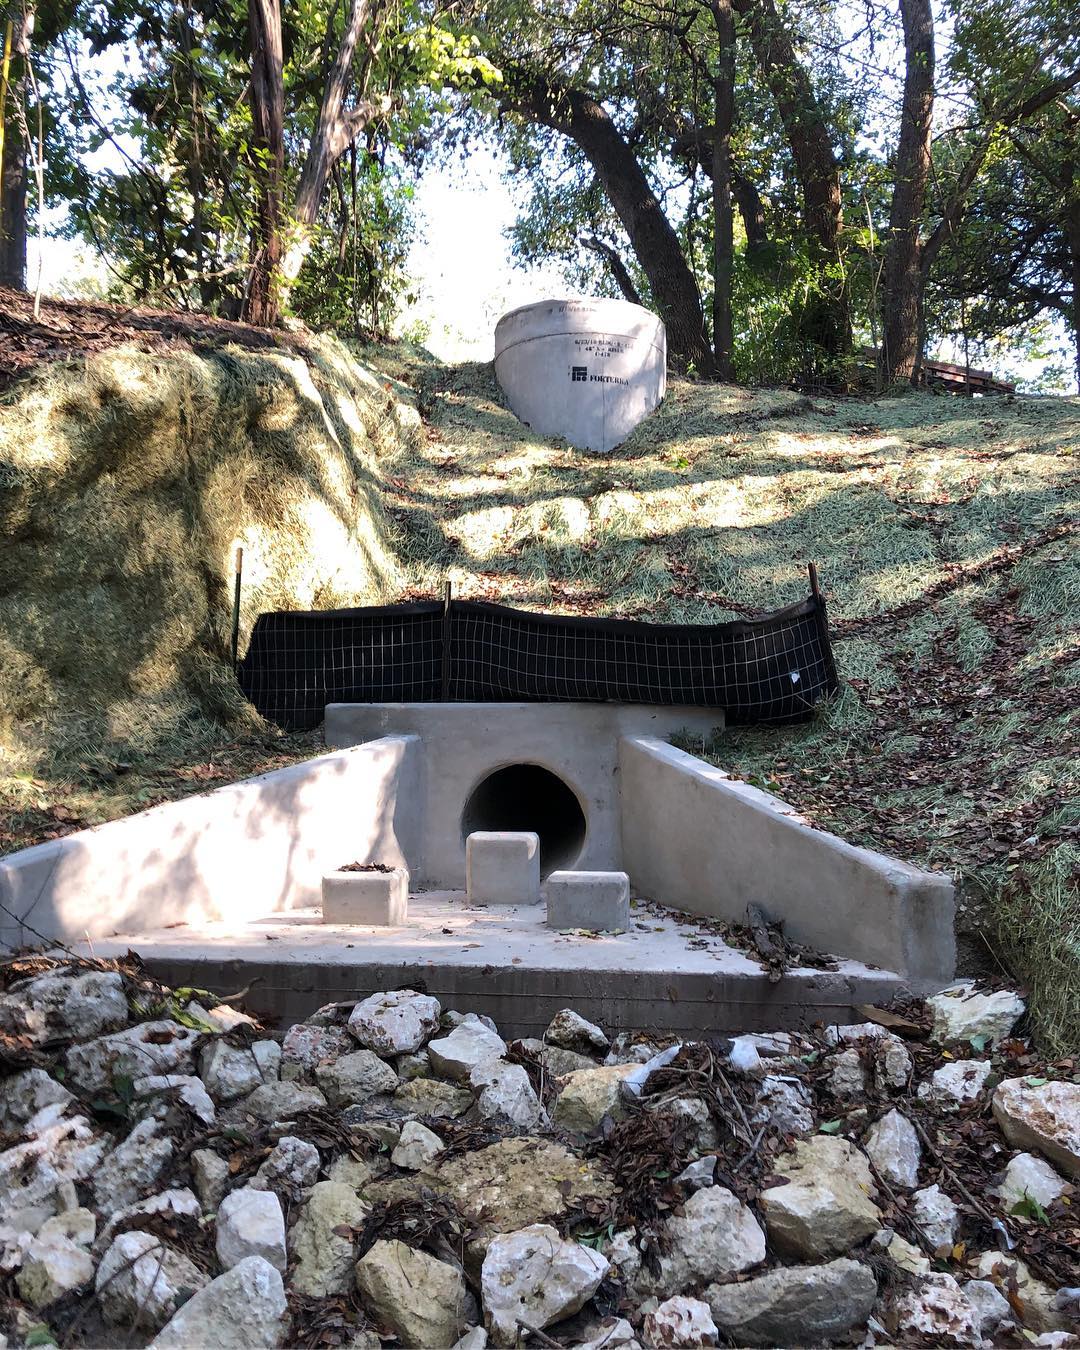 A triangular structure that directs stormwater onto rocky forest ground where it can be safely absorbed.